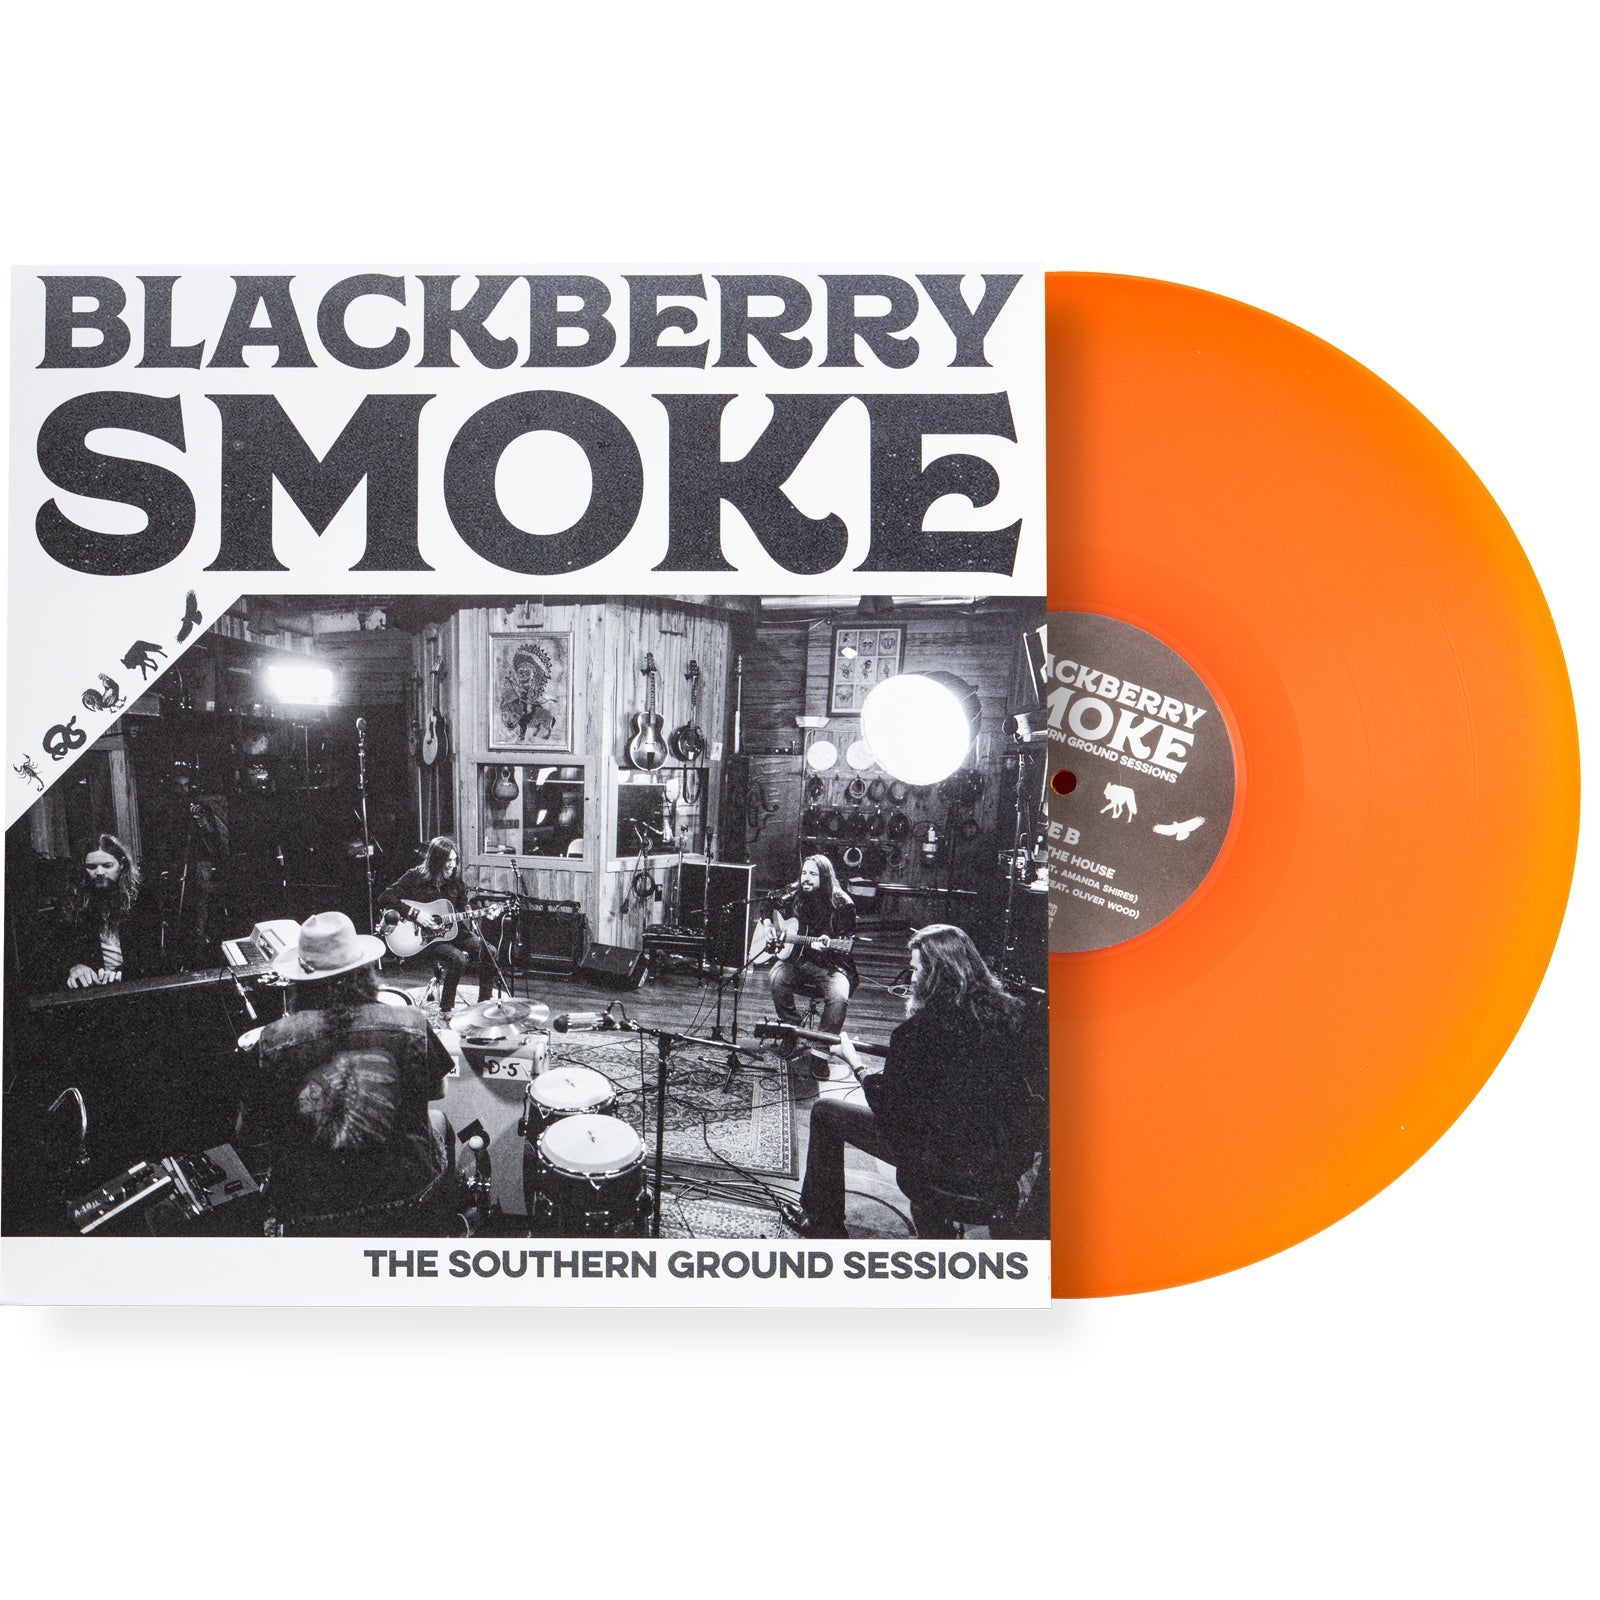 Blackberry Smoke THE SOUTHERN GROUND SESSIONS ACOUSTIC EP VINYL